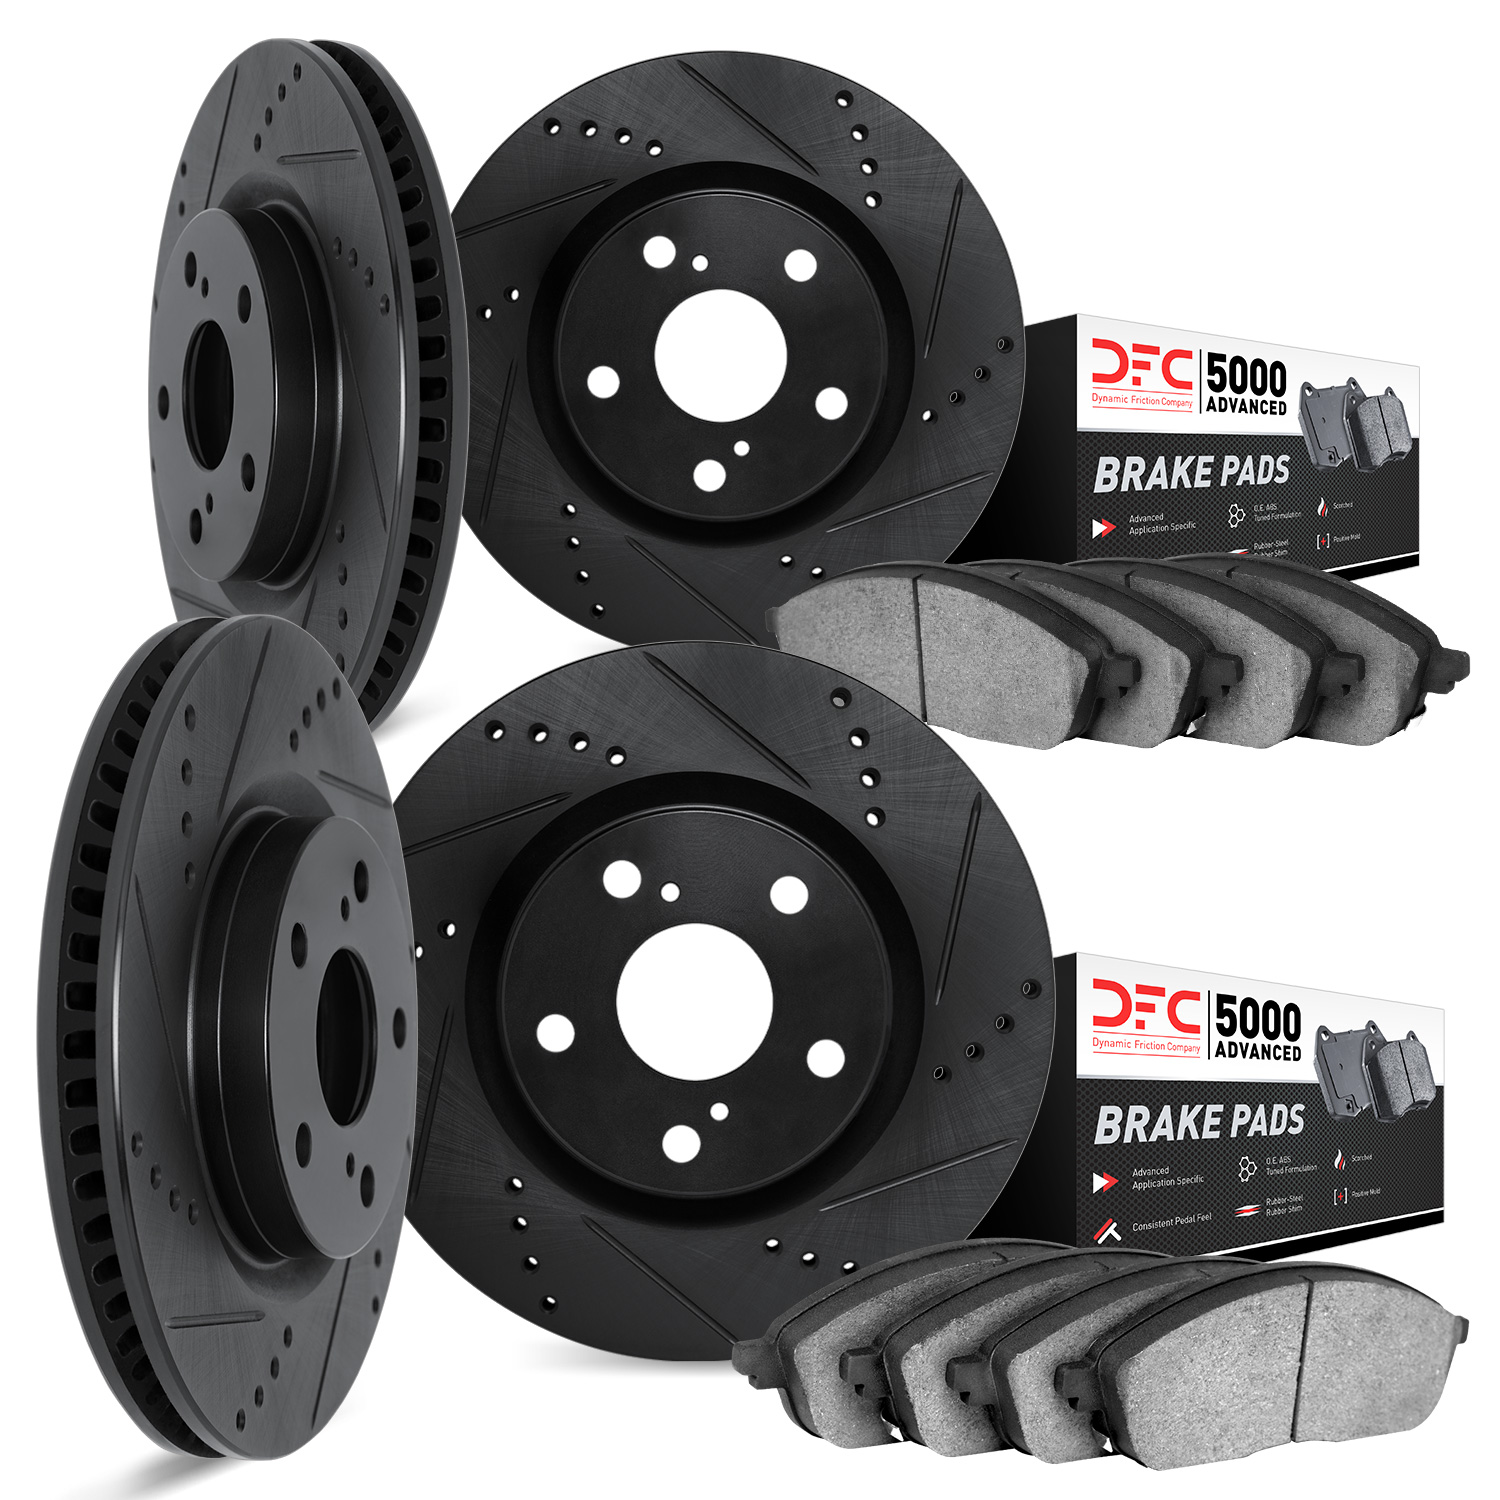 8504-67109 Drilled/Slotted Brake Rotors w/5000 Advanced Brake Pads Kit [Black], 2011-2013 Infiniti/Nissan, Position: Front and R